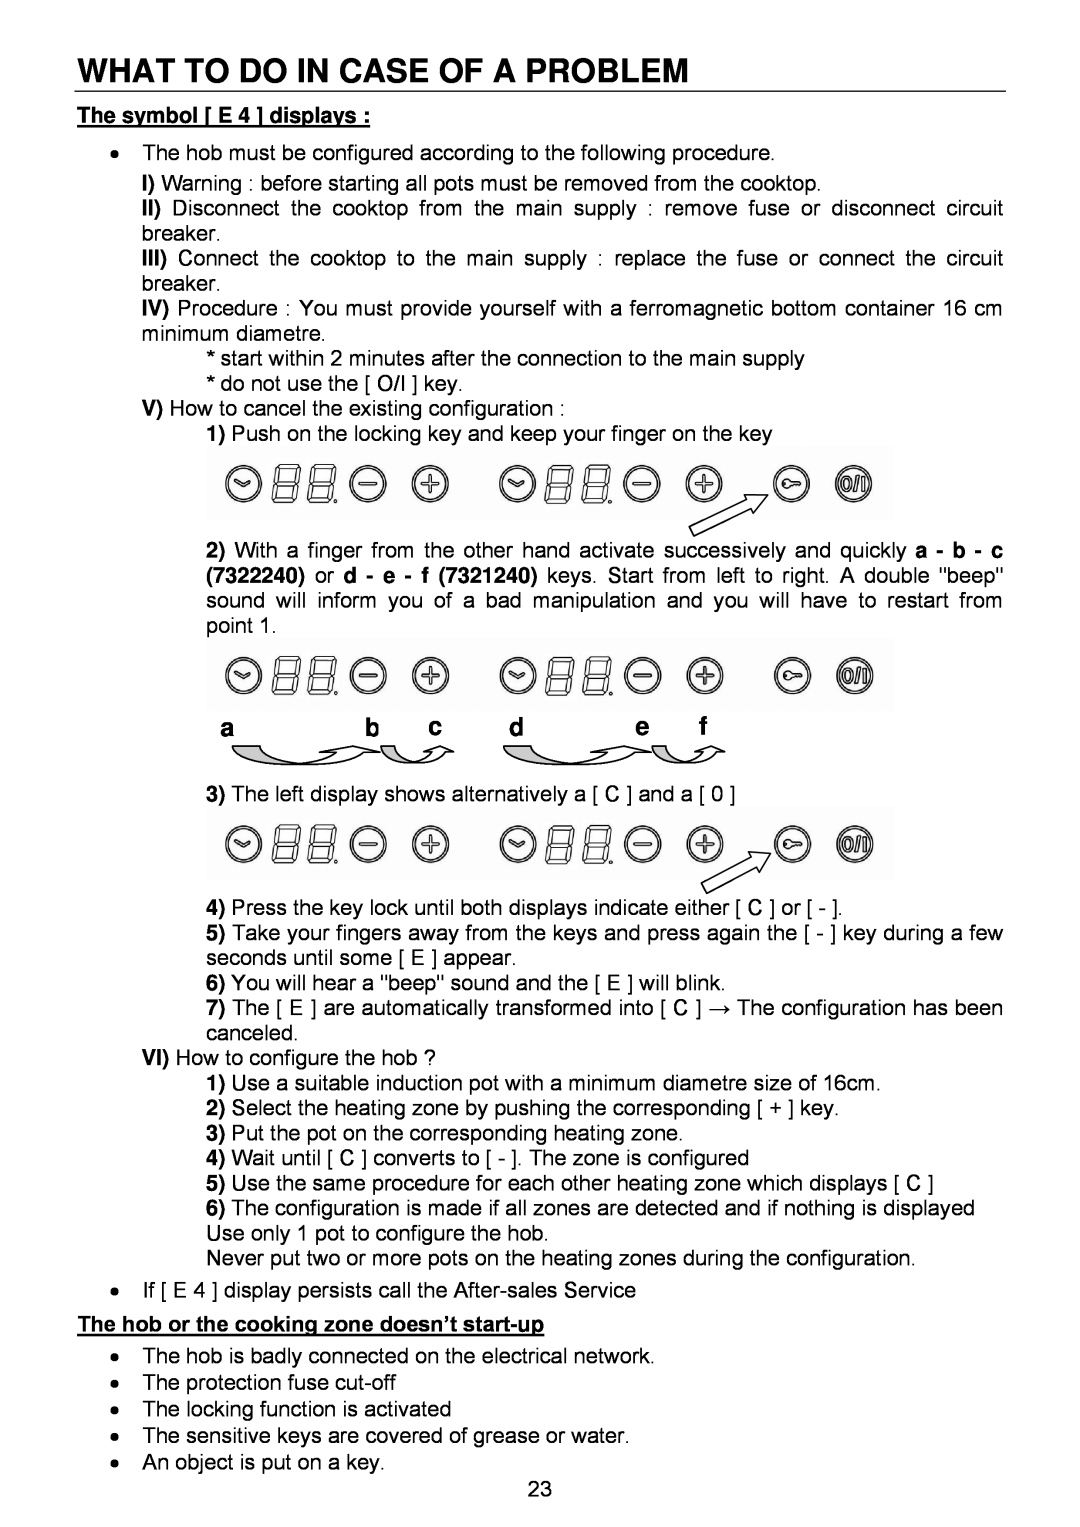 321 Studios 7322 230 user manual What To Do In Case Of A Problem, The symbol E 4 displays 